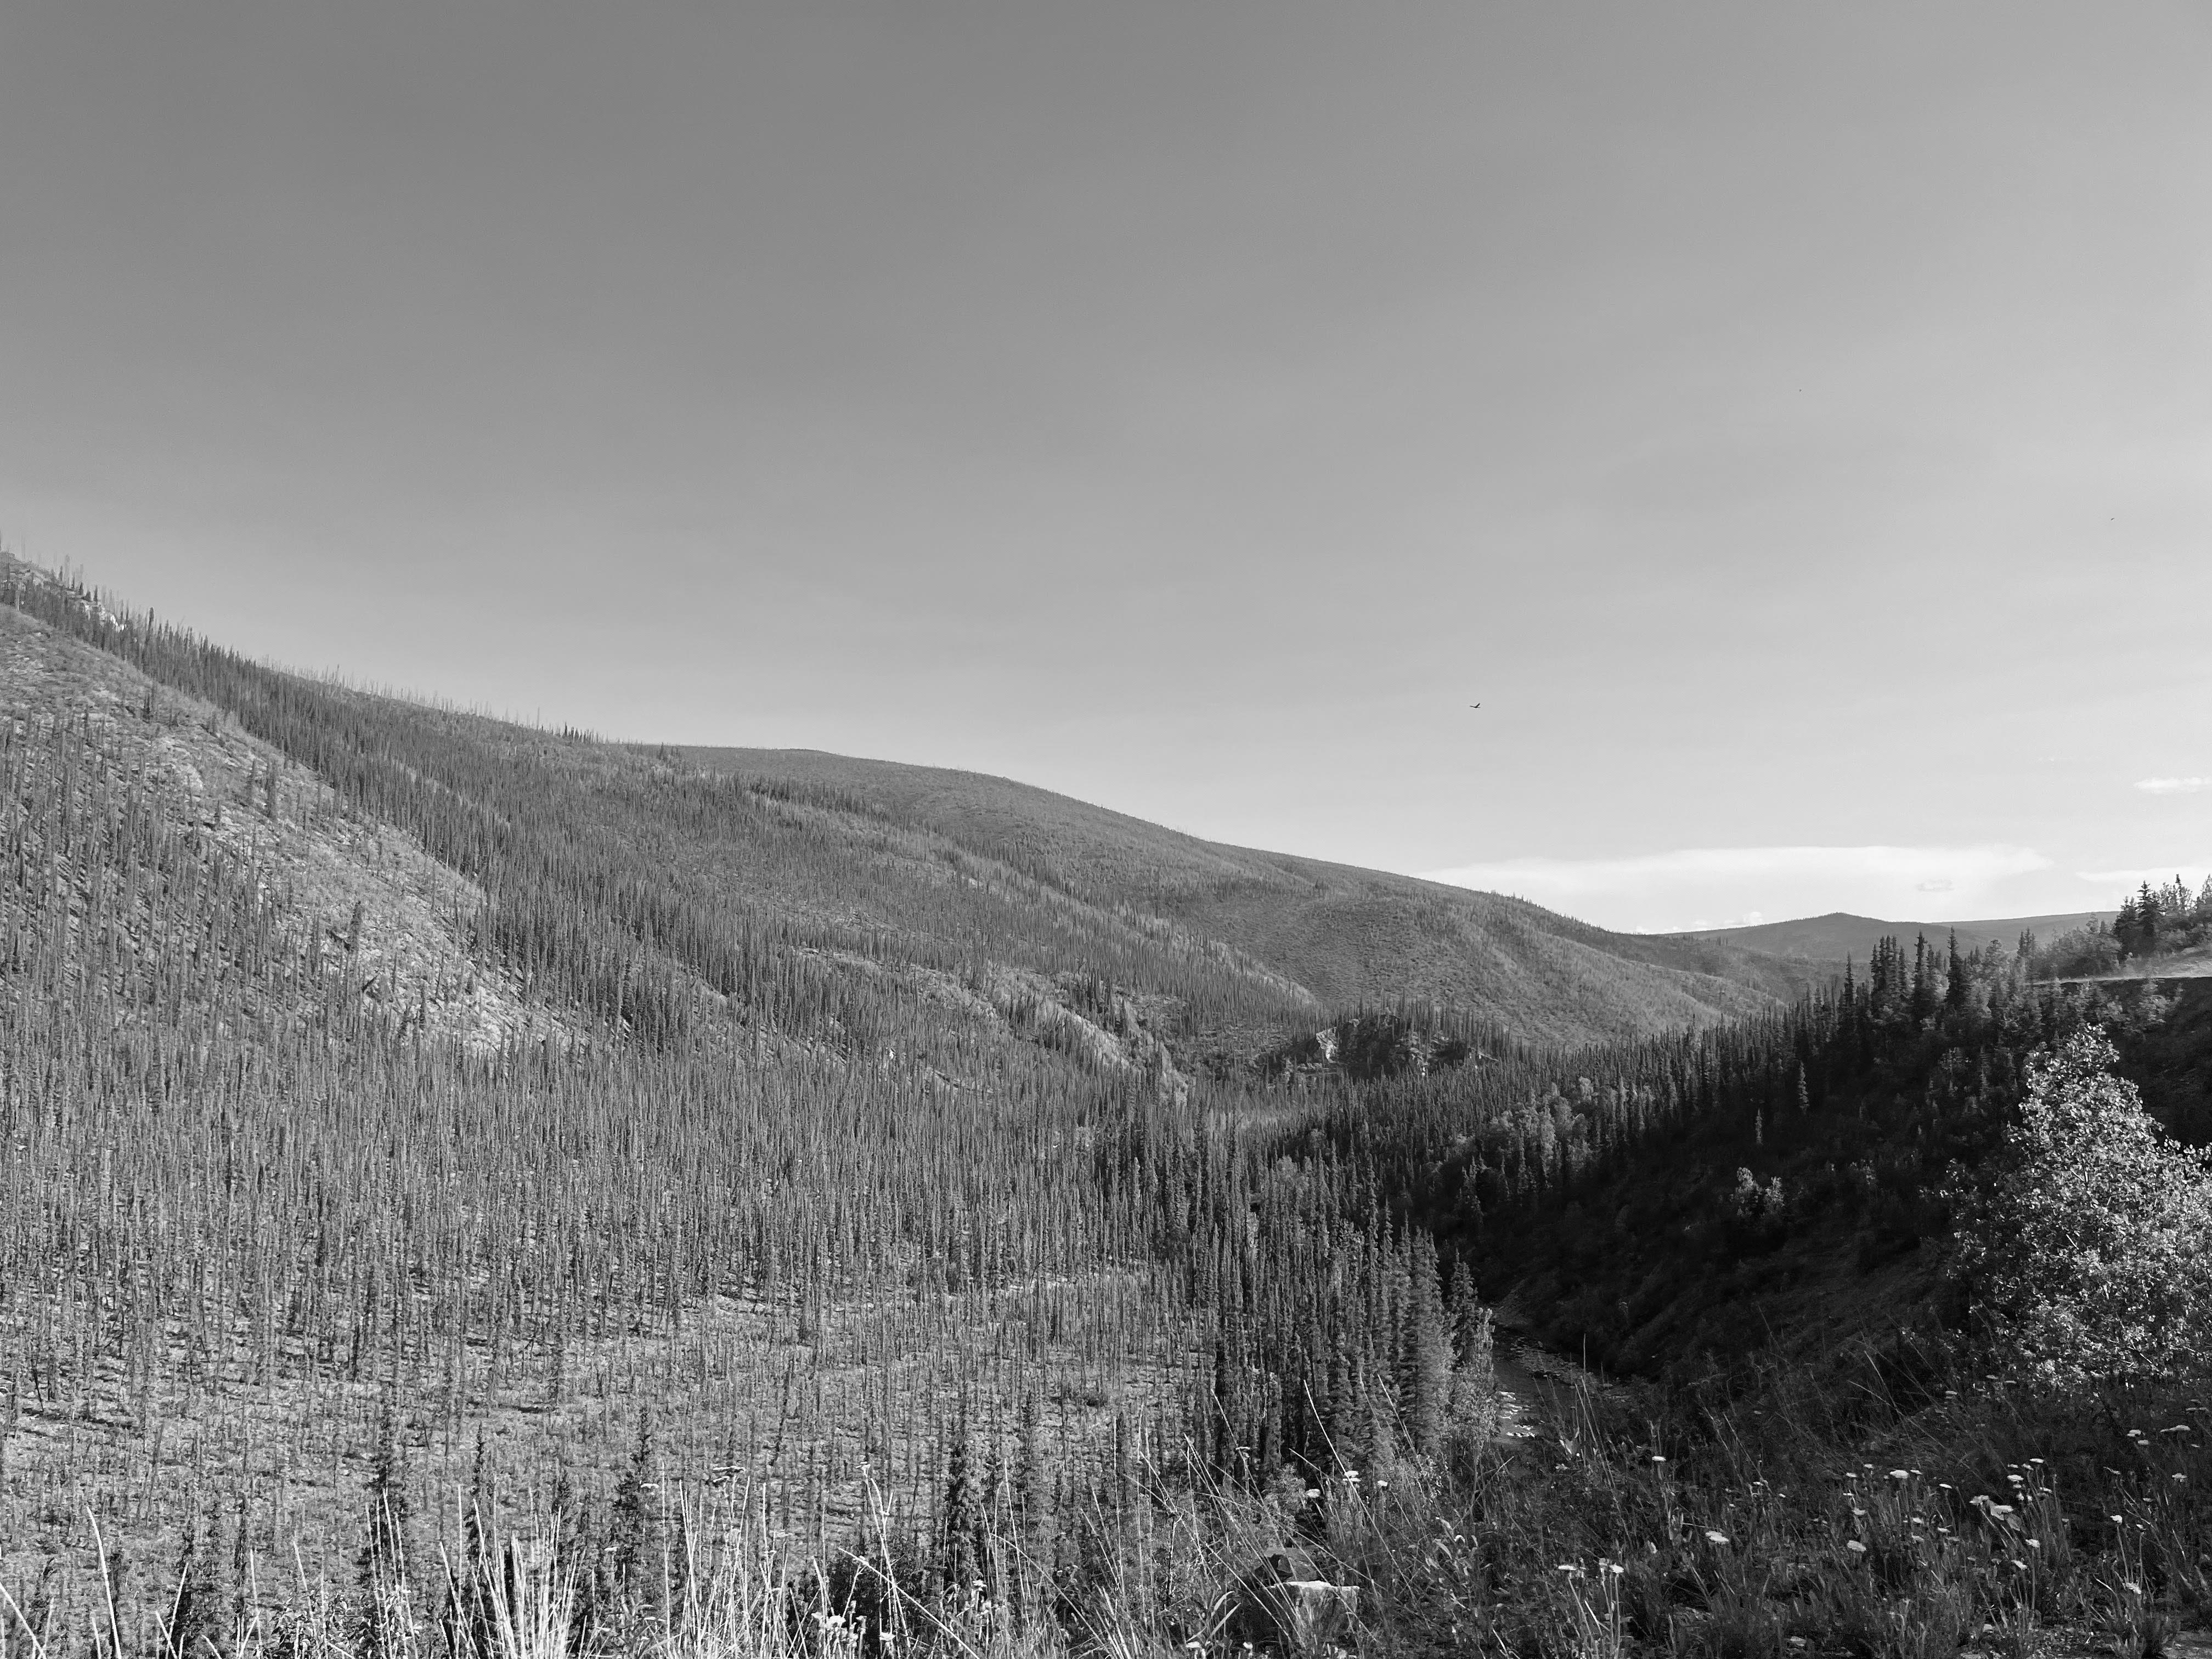 A black and white photo on an evergreen forest just beyond an area of wildflowers near the front of the photo. The trees appear nearly evenly spaced, spread out along rolling mountains. A river can just be see tucked inside of a steep valley. 